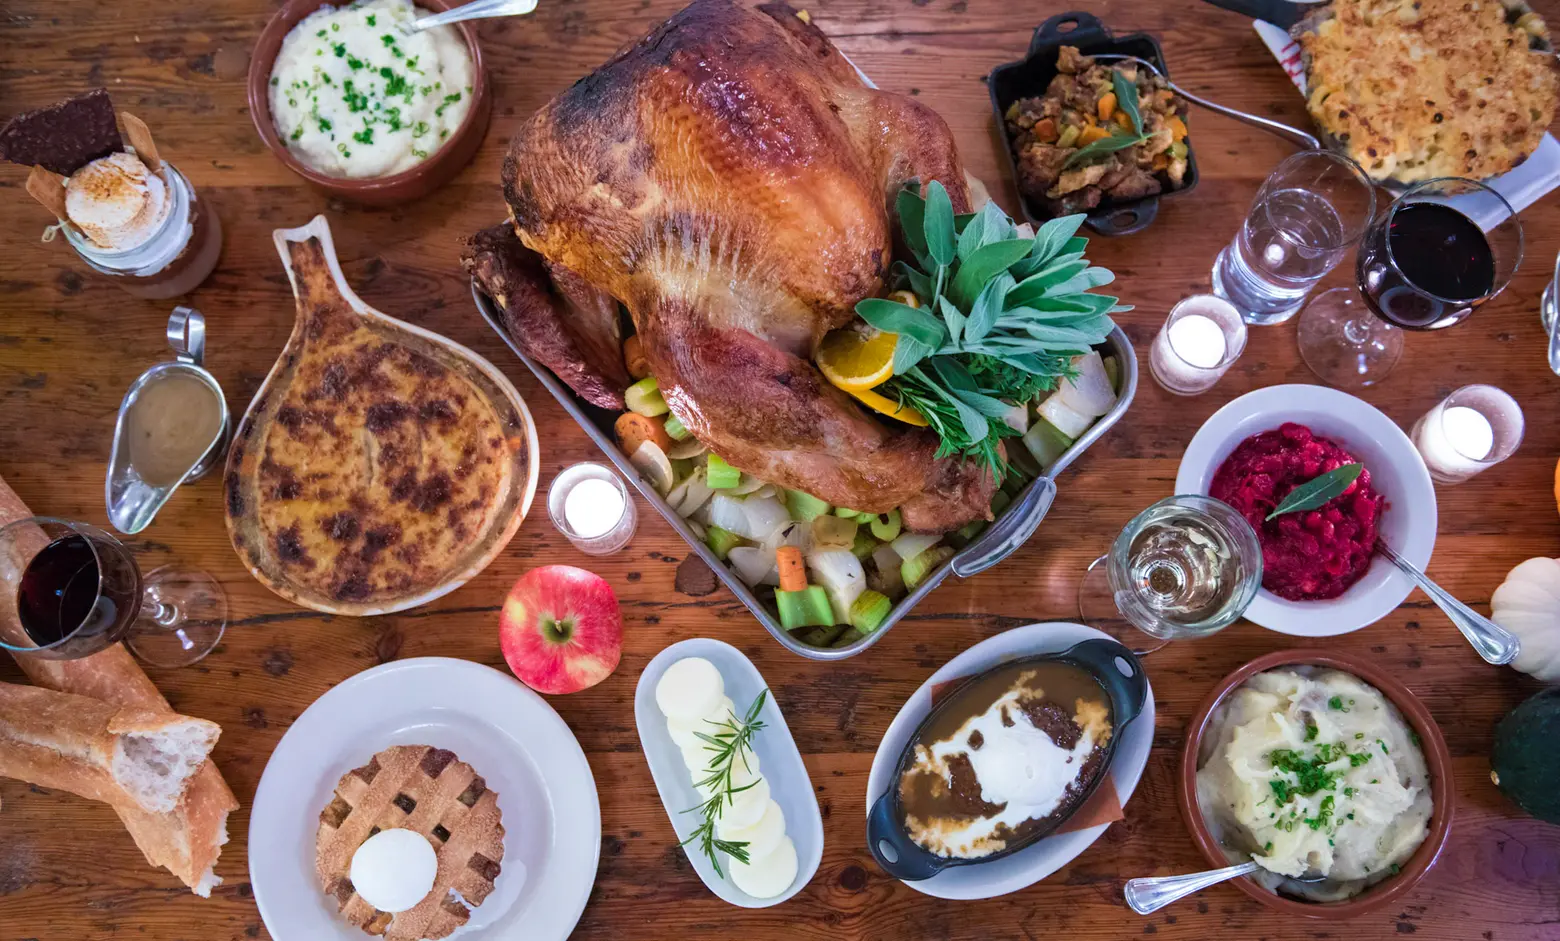 Where to go out for Thanksgiving dinner in NYC